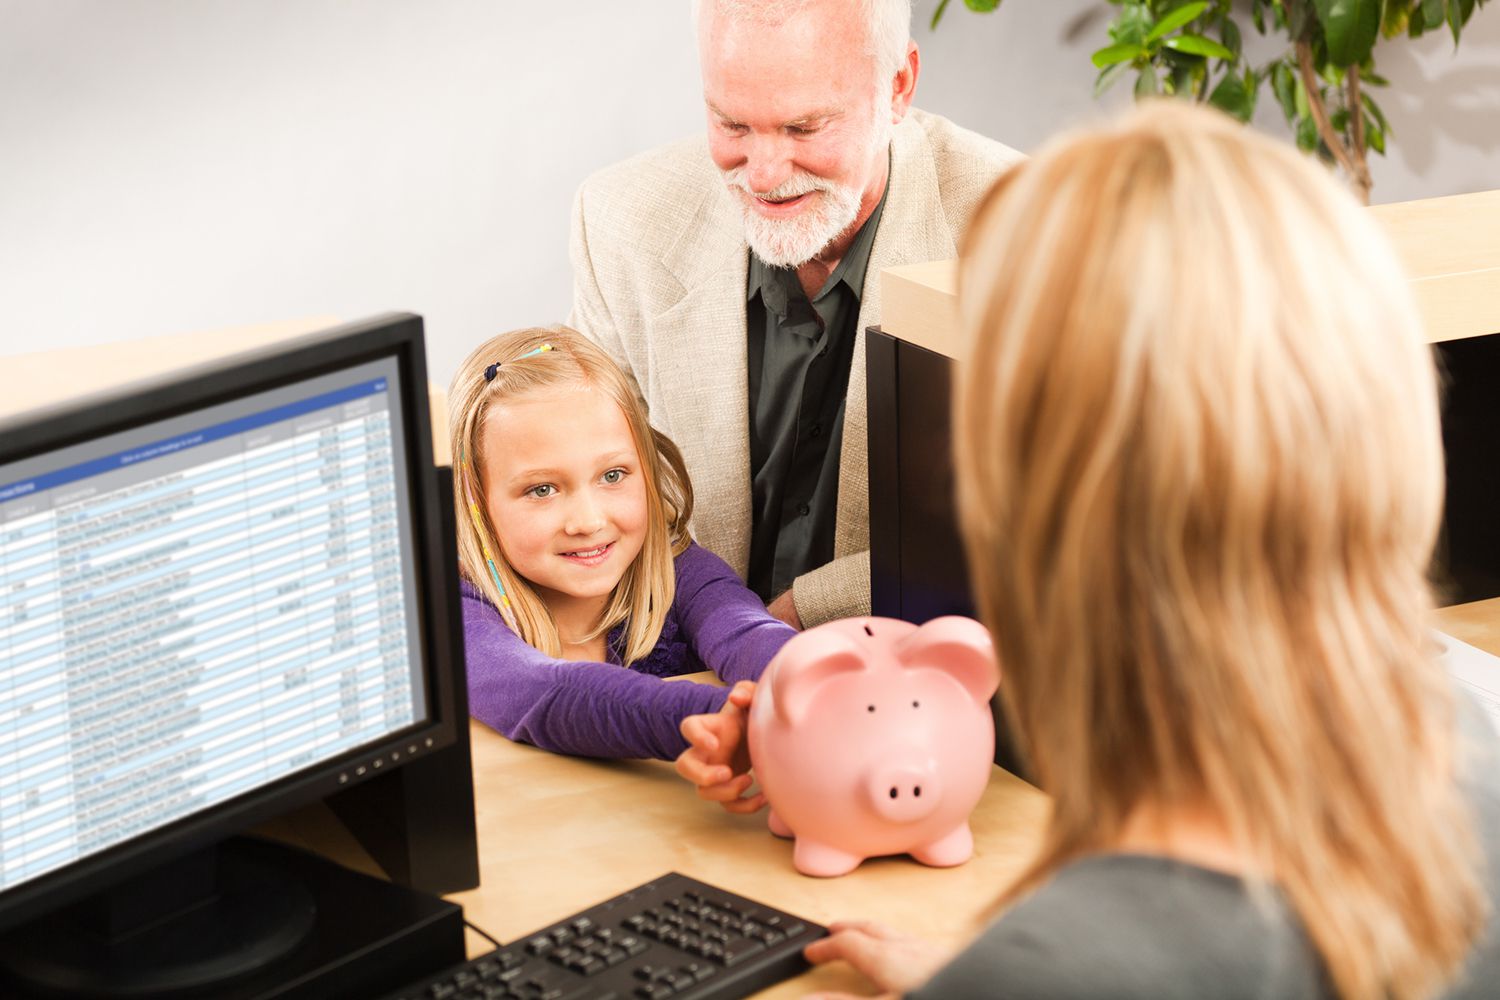 Child Handing Coin Piggy Bank, Opening Bank Account With Teller